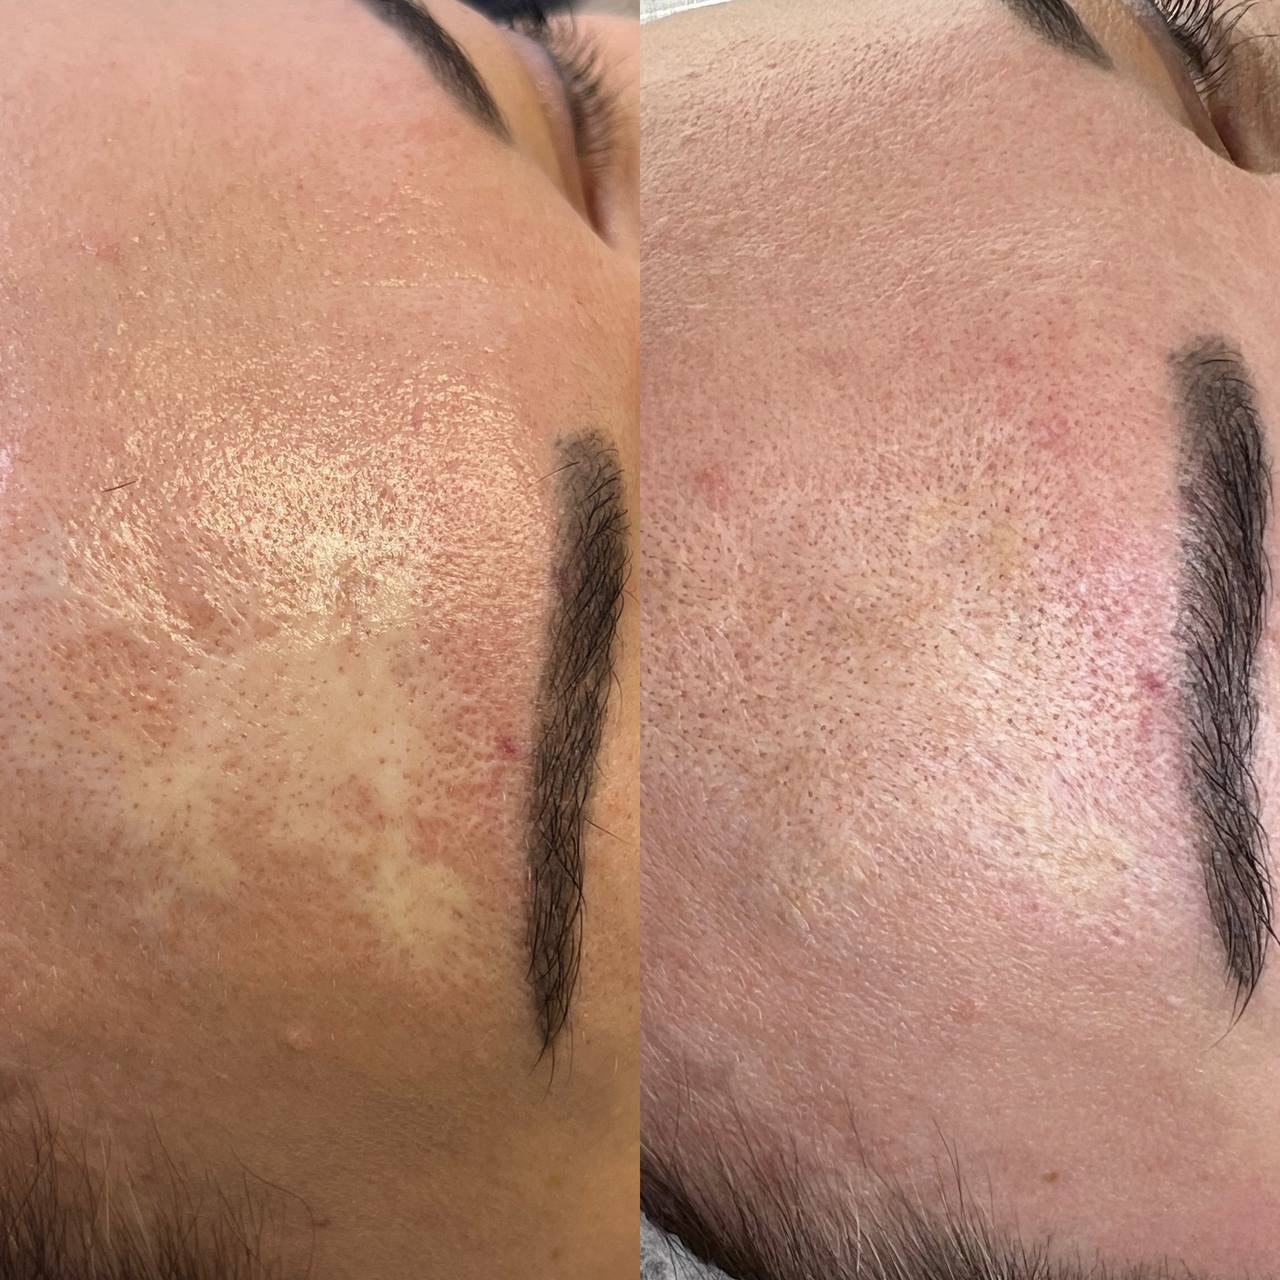 Scar Camouflage Medical Tattoo. Cosmetic and Mediical Tattoo by Dasha. Permanent makeup and reconstructive tattoo, scalp micro-pigmentation in Christchurch, New Zealand